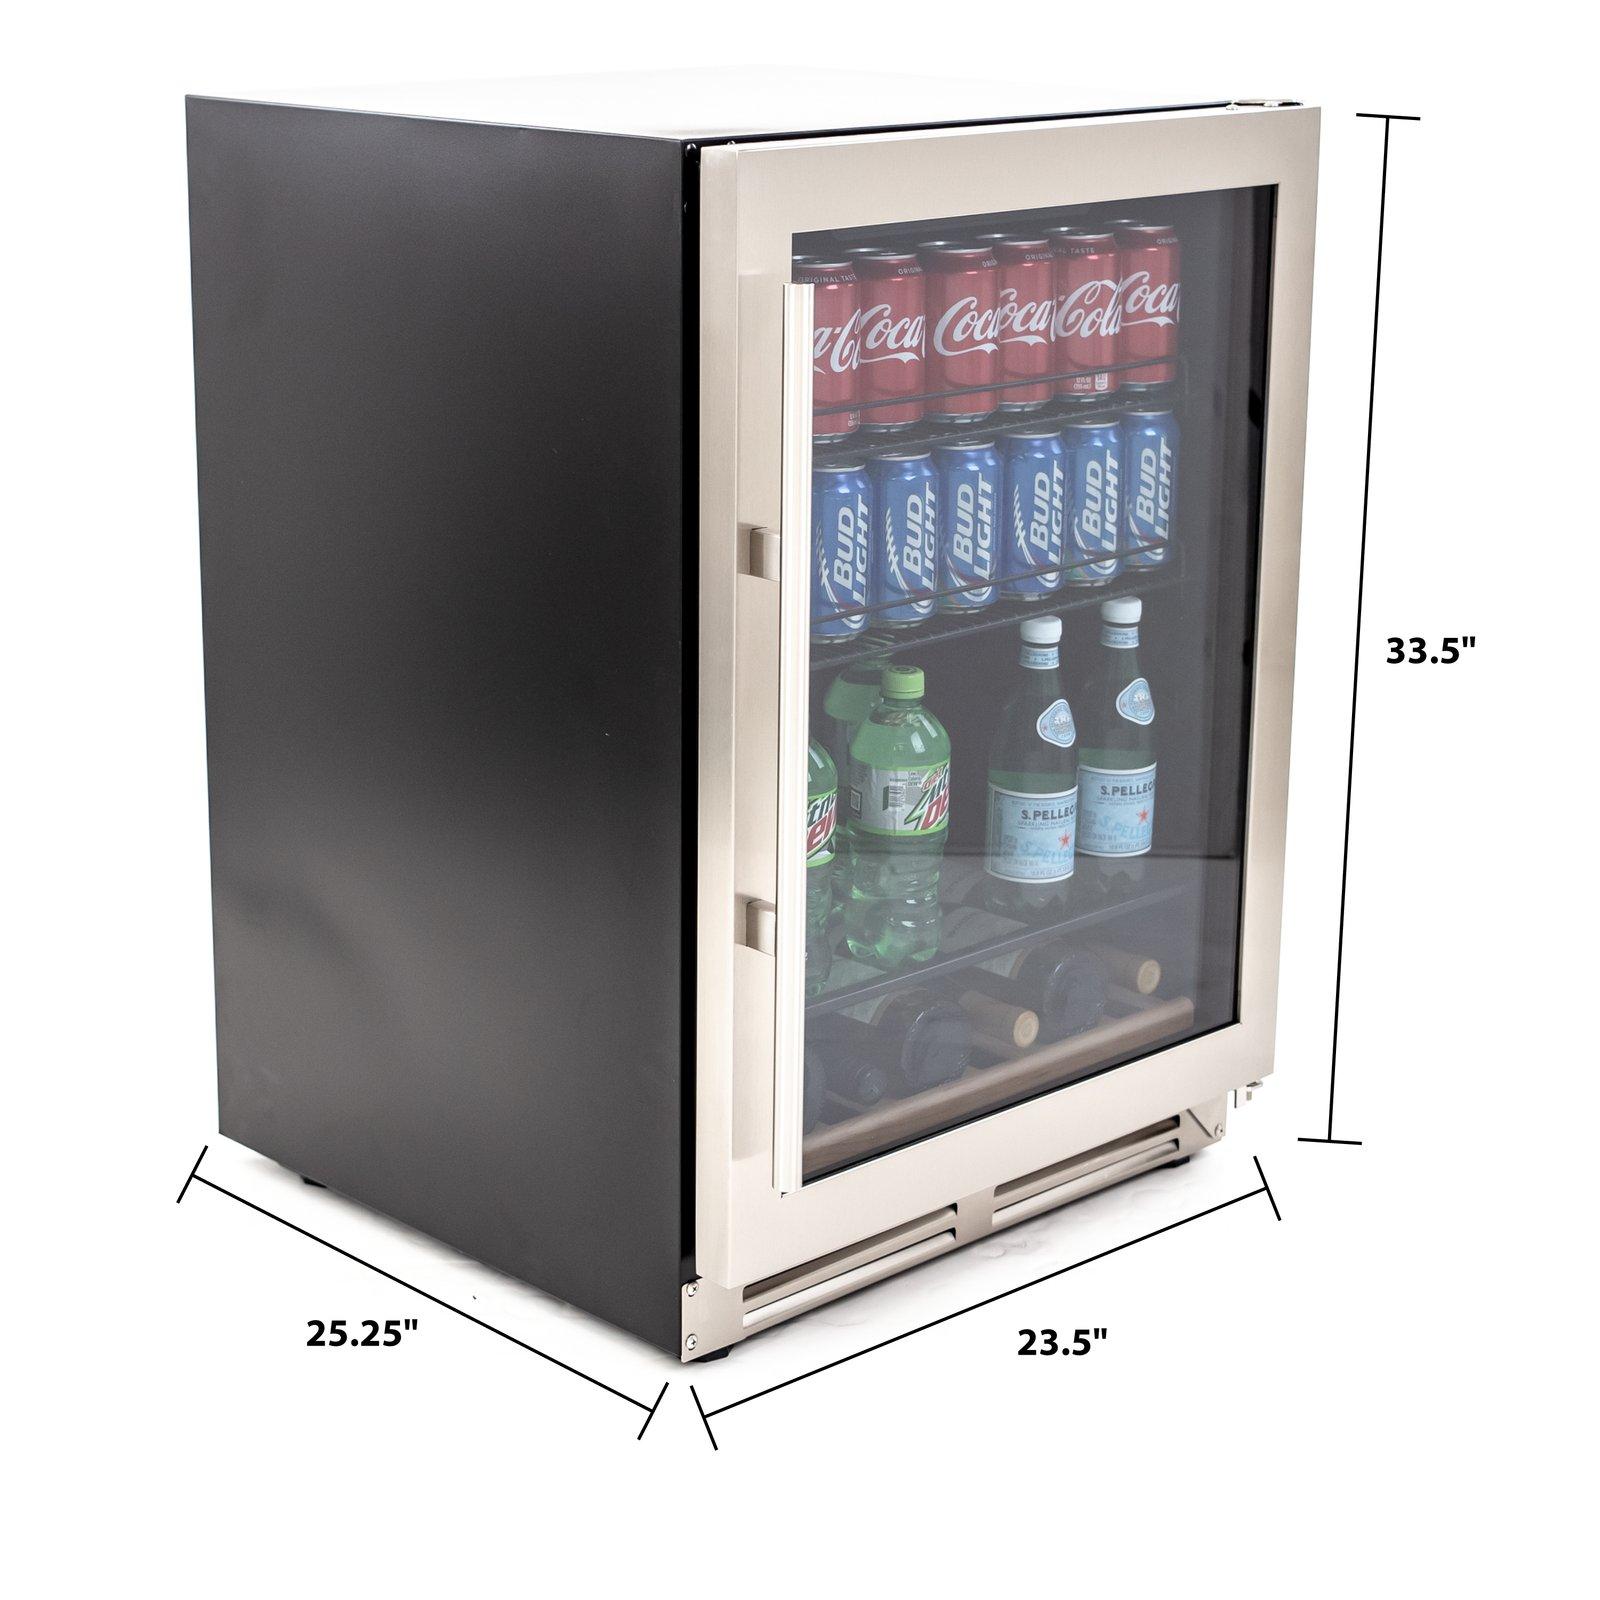 Avanti 126 Can Beverage Center - Stainless Steel with Black Cabinet / 5.8 cu. ft.